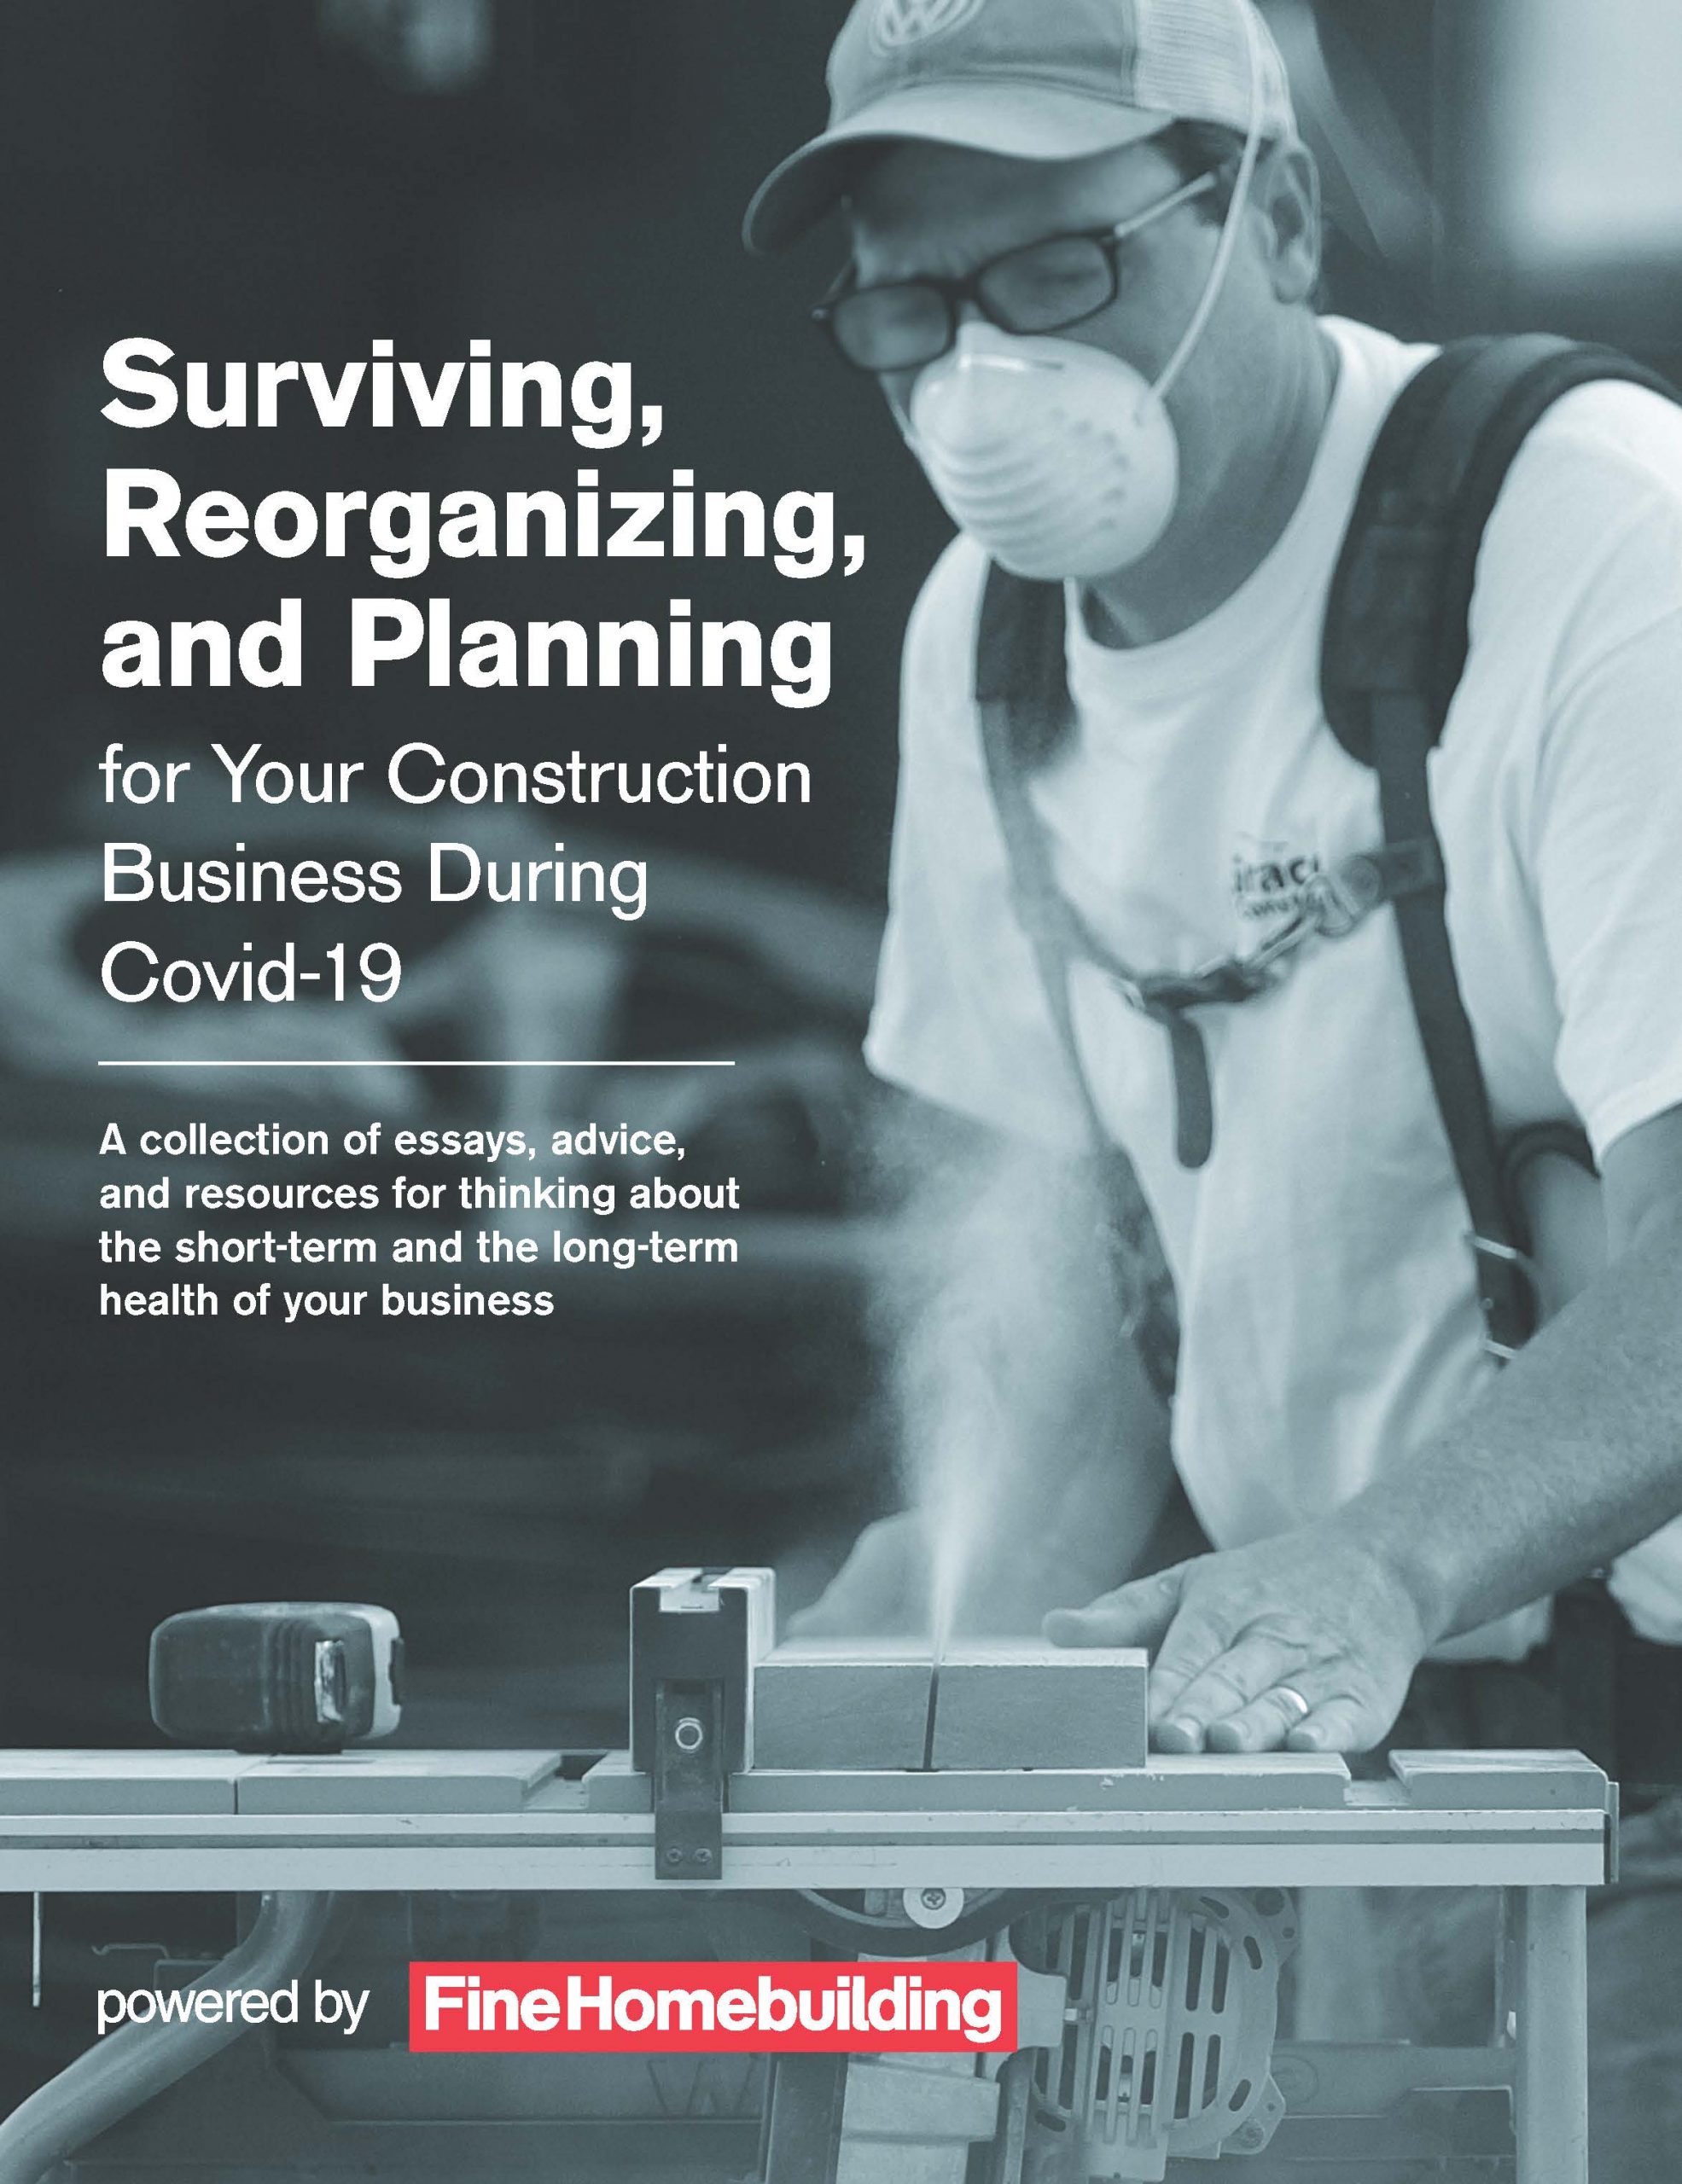 FineHomebuilding Surviving, Reorganizing, and Planning for Covid-19 PDF Download Cover